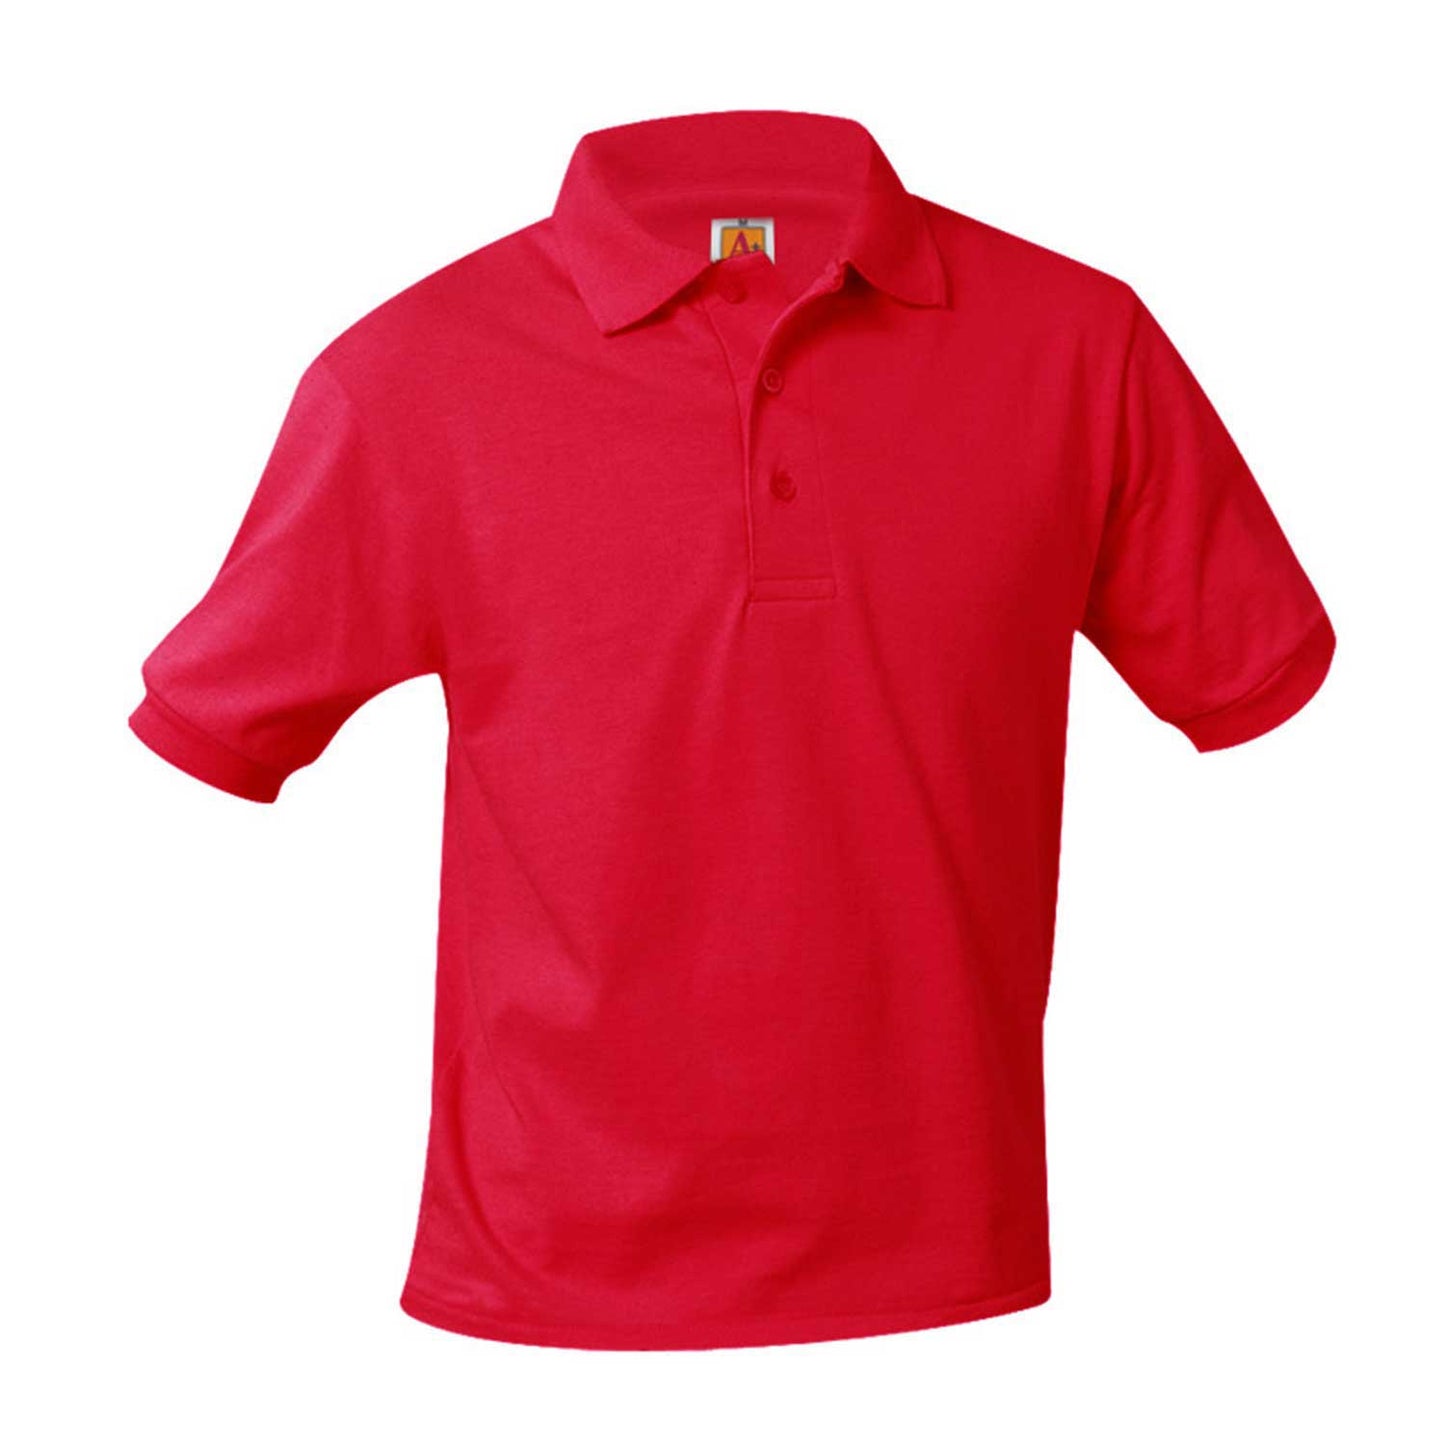 TCPS Jersey Unisex Polo